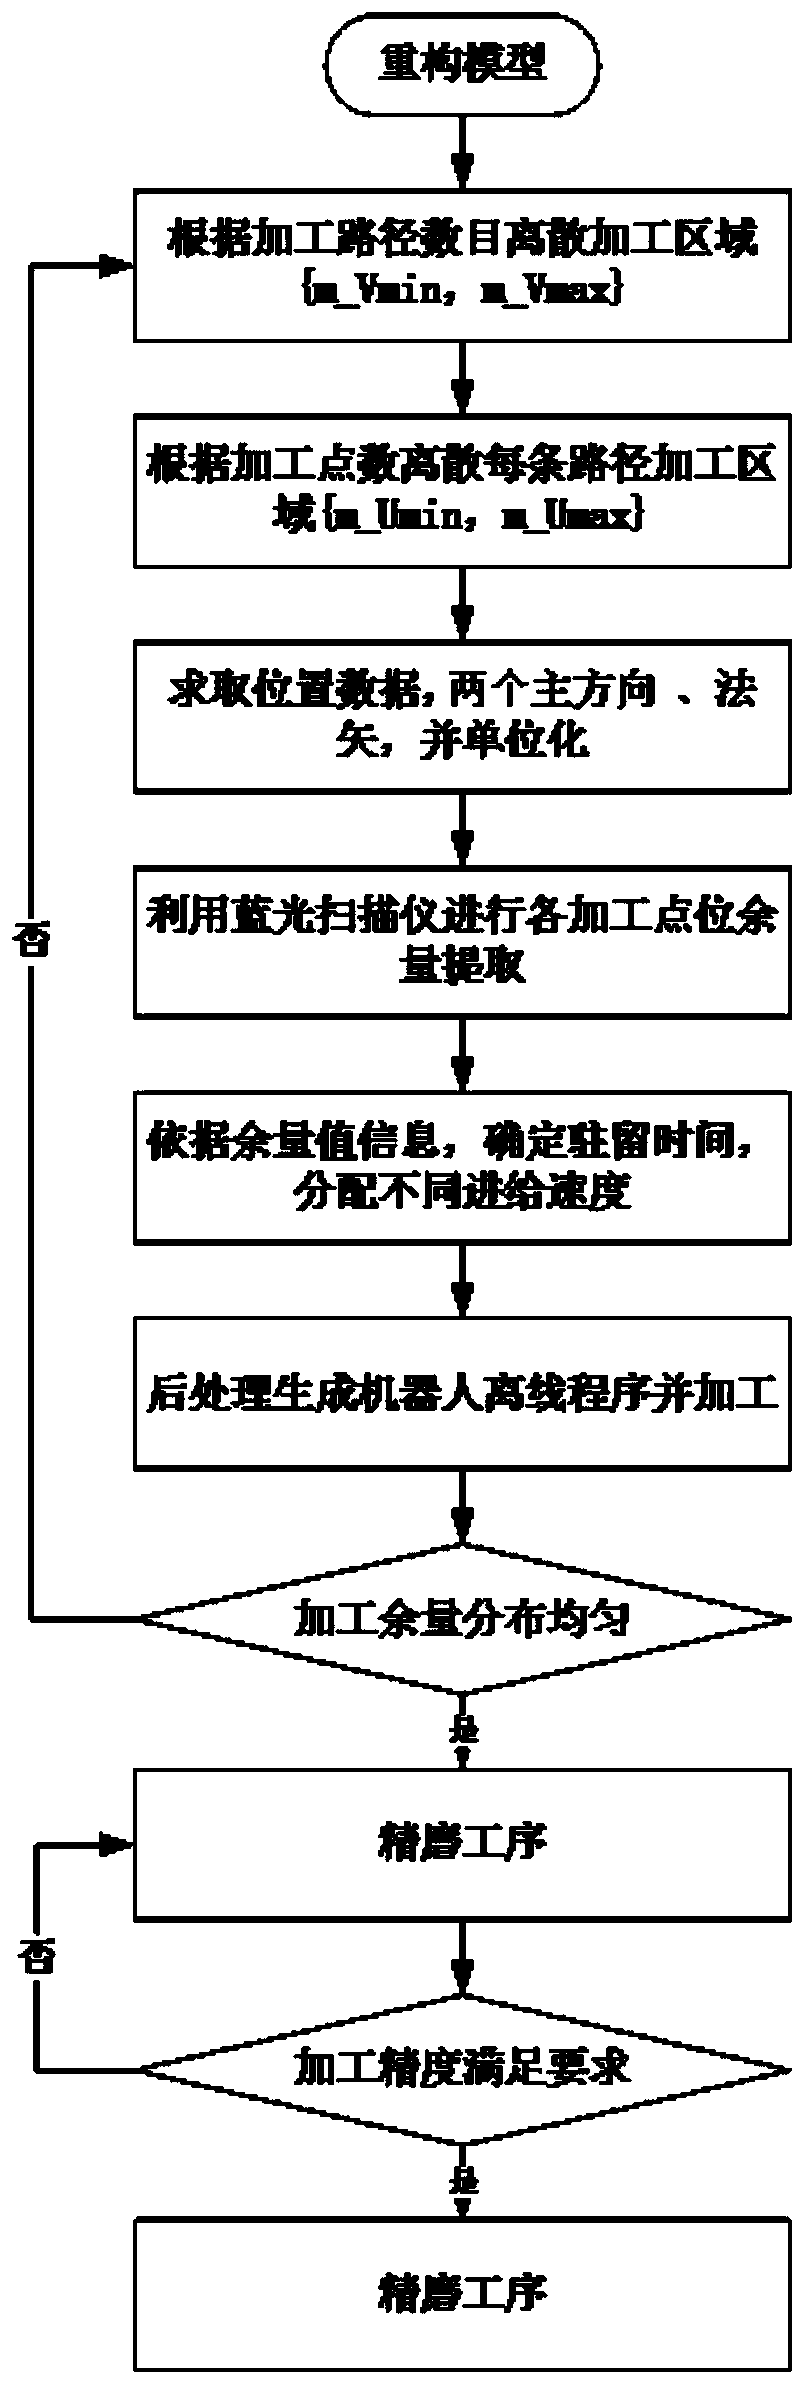 Complex curved surface robot abrasive belt variable feeding self-adaptive grinding method and equipment